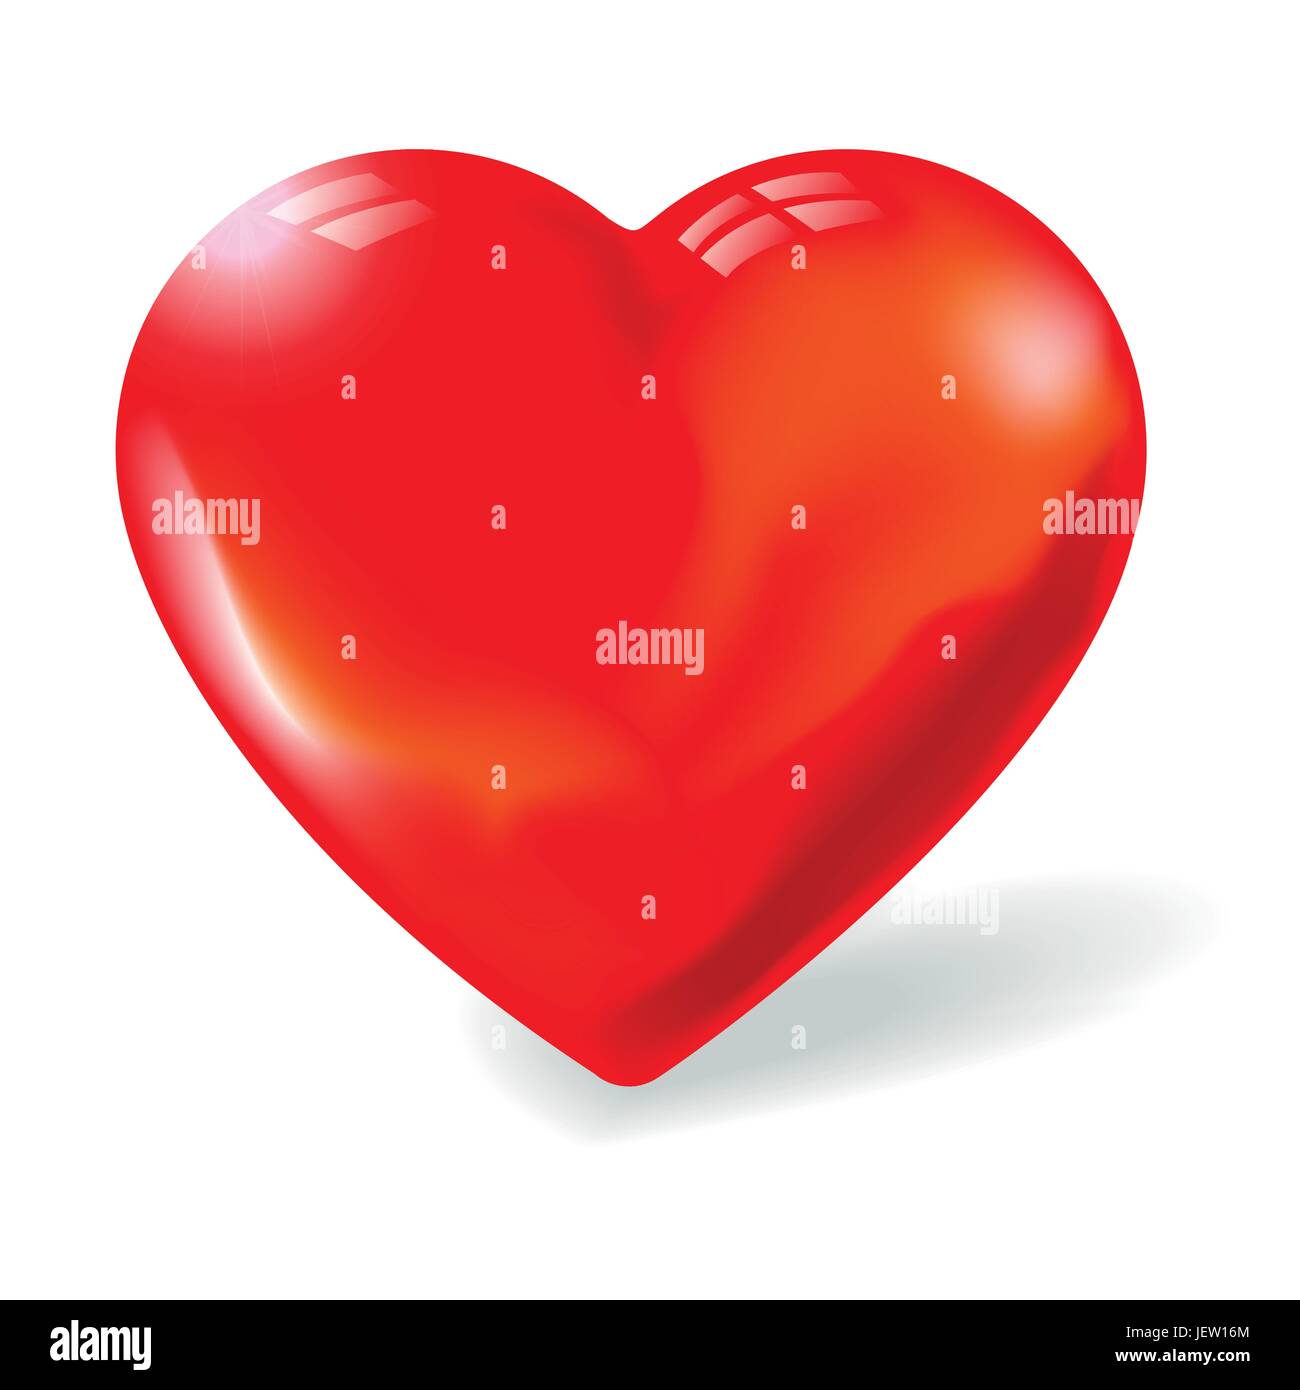 woman, affection, mothers, hearts, love, in love, fell in love, questioning, Stock Vector